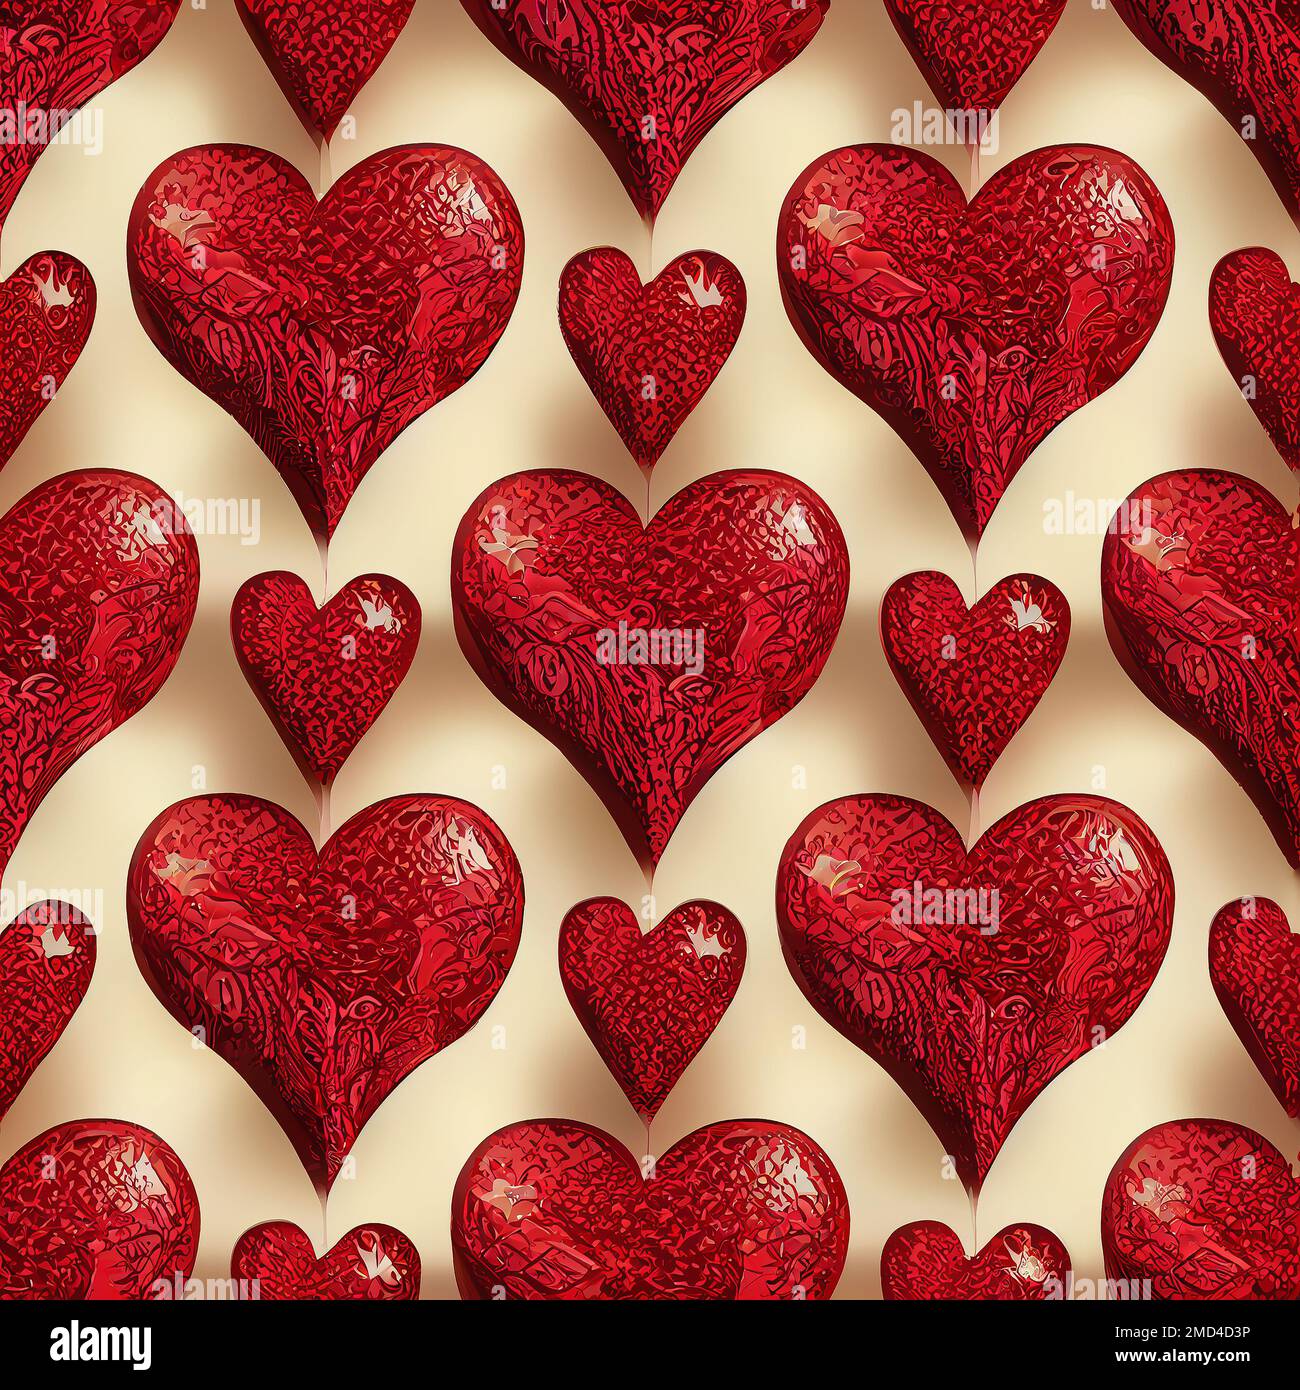 Red hearts seamless pattern Stock Photo